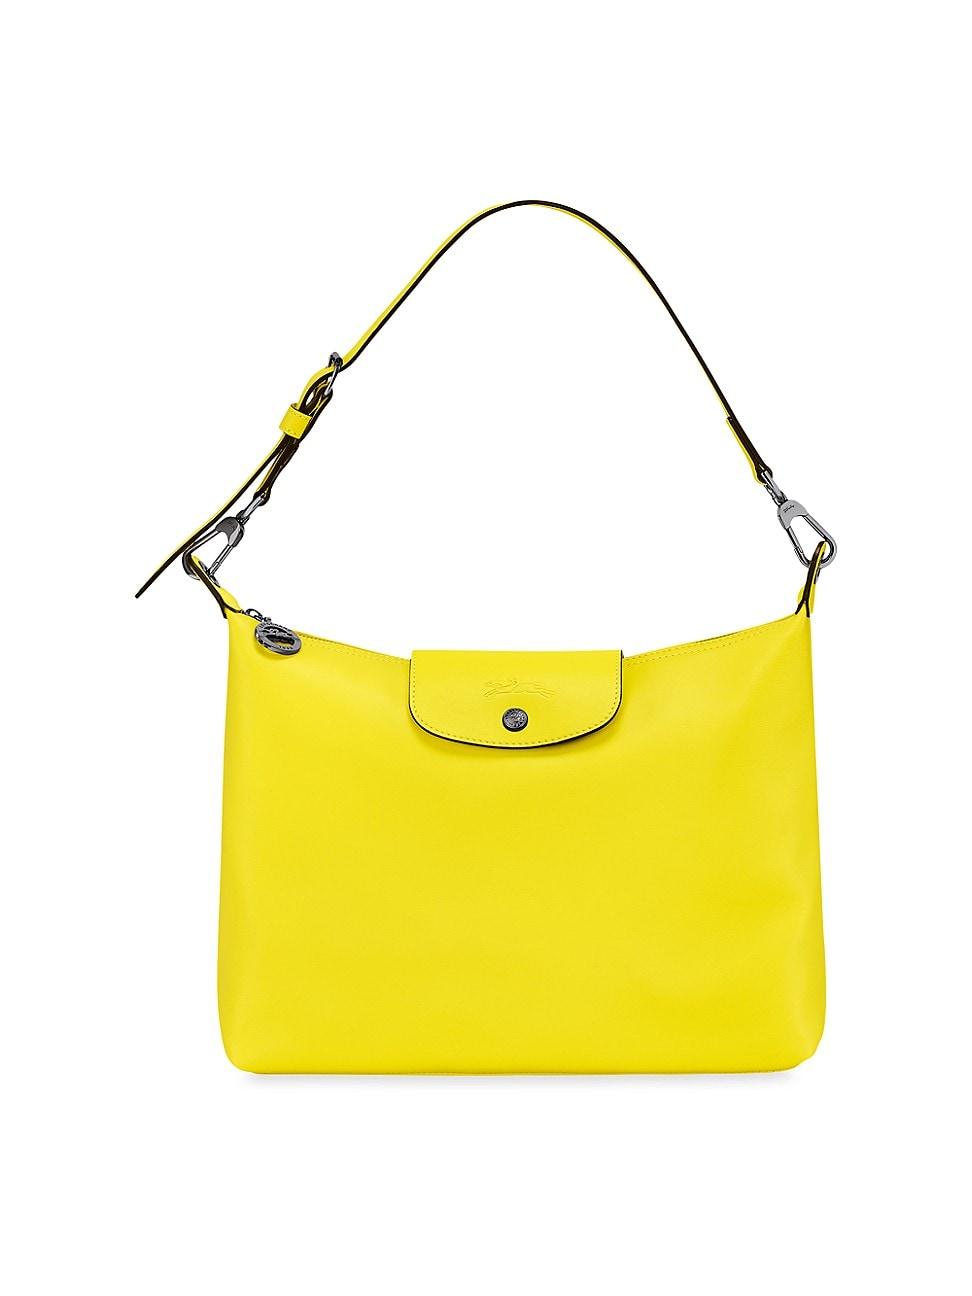 Longchamp Le Pliage Xtra Leather Hobo Bag in Yellow | Lyst